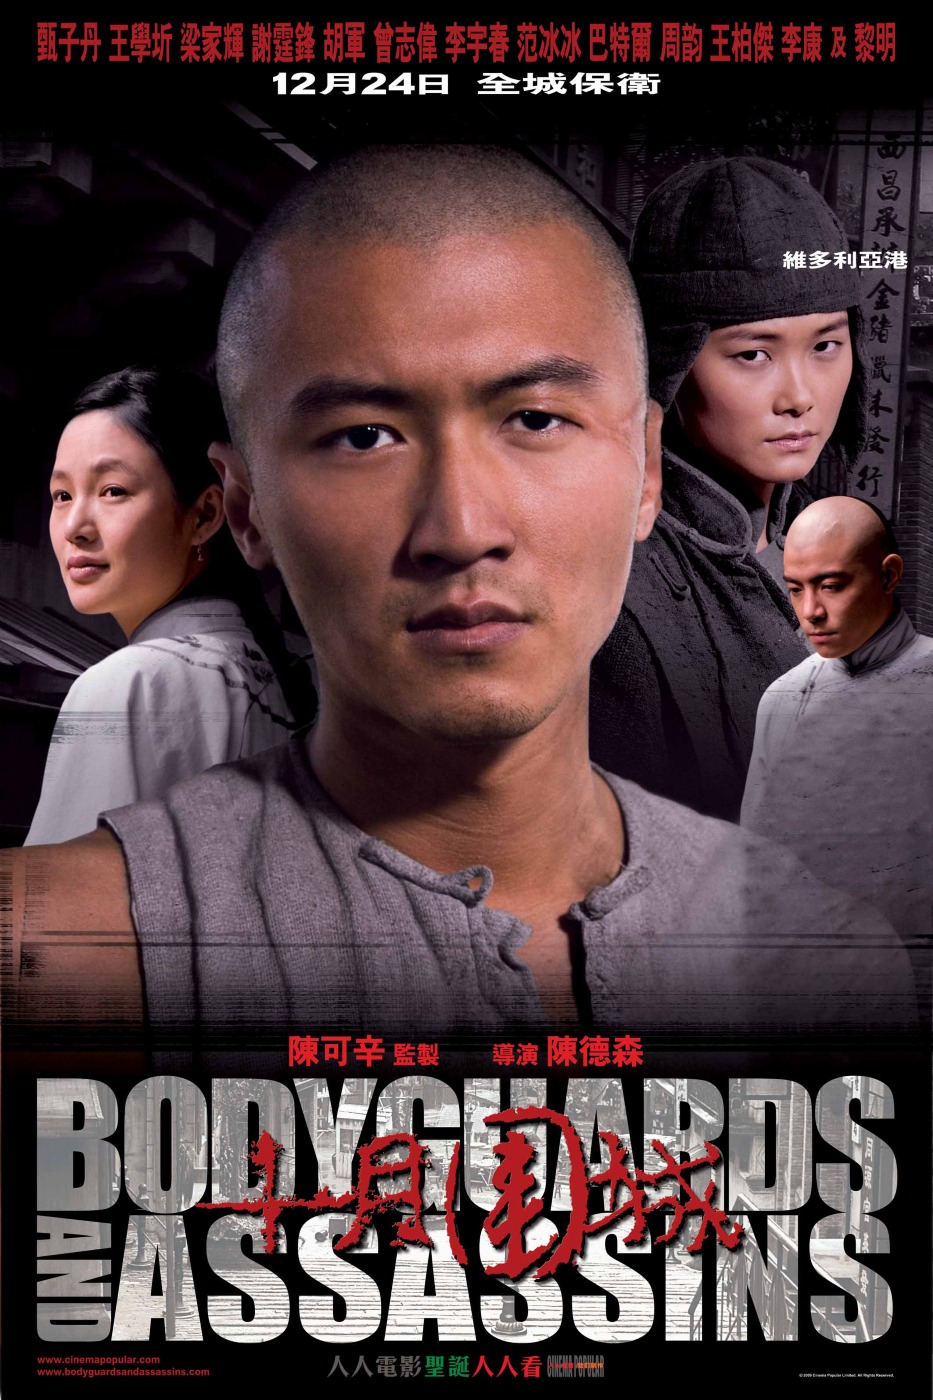 bodyguards, assassins, poster, Movies, posters, 